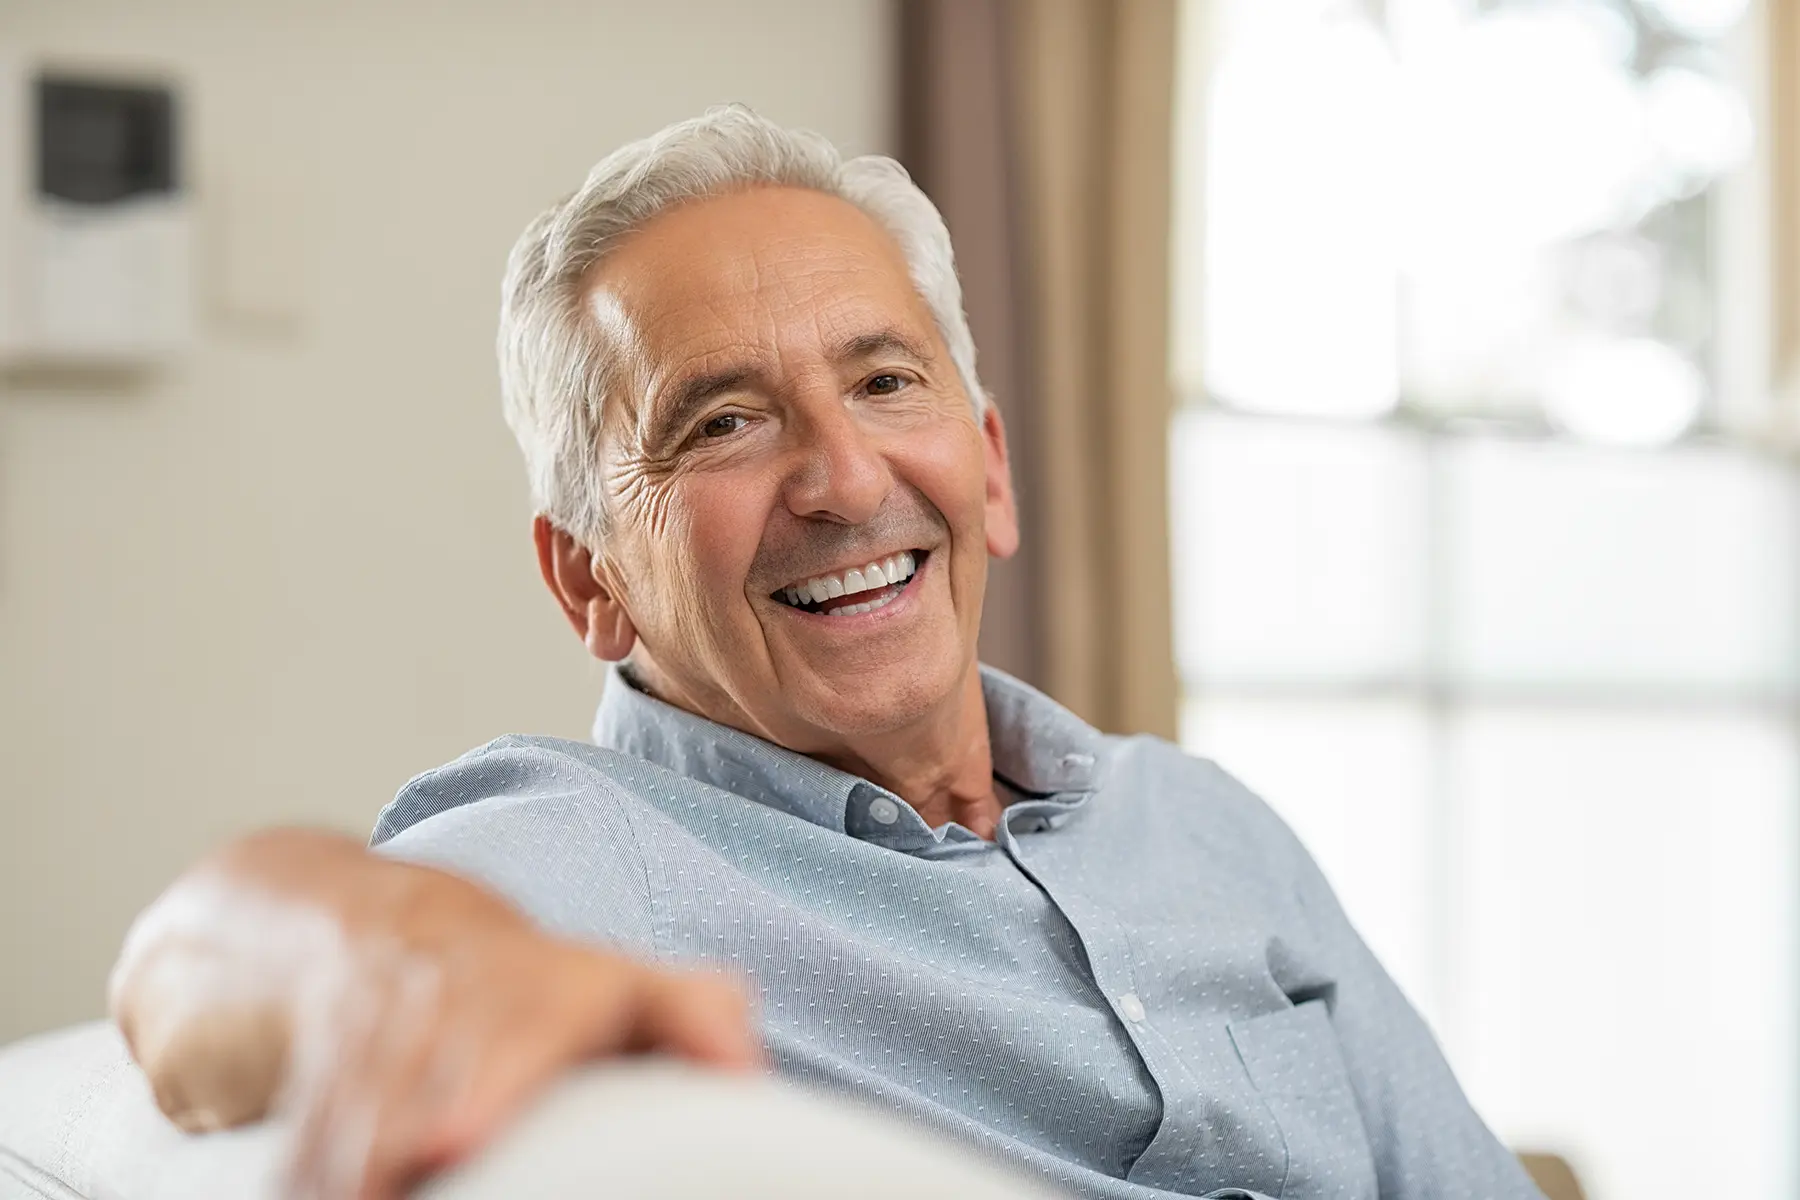 Older man sitting on the couch and smiling.